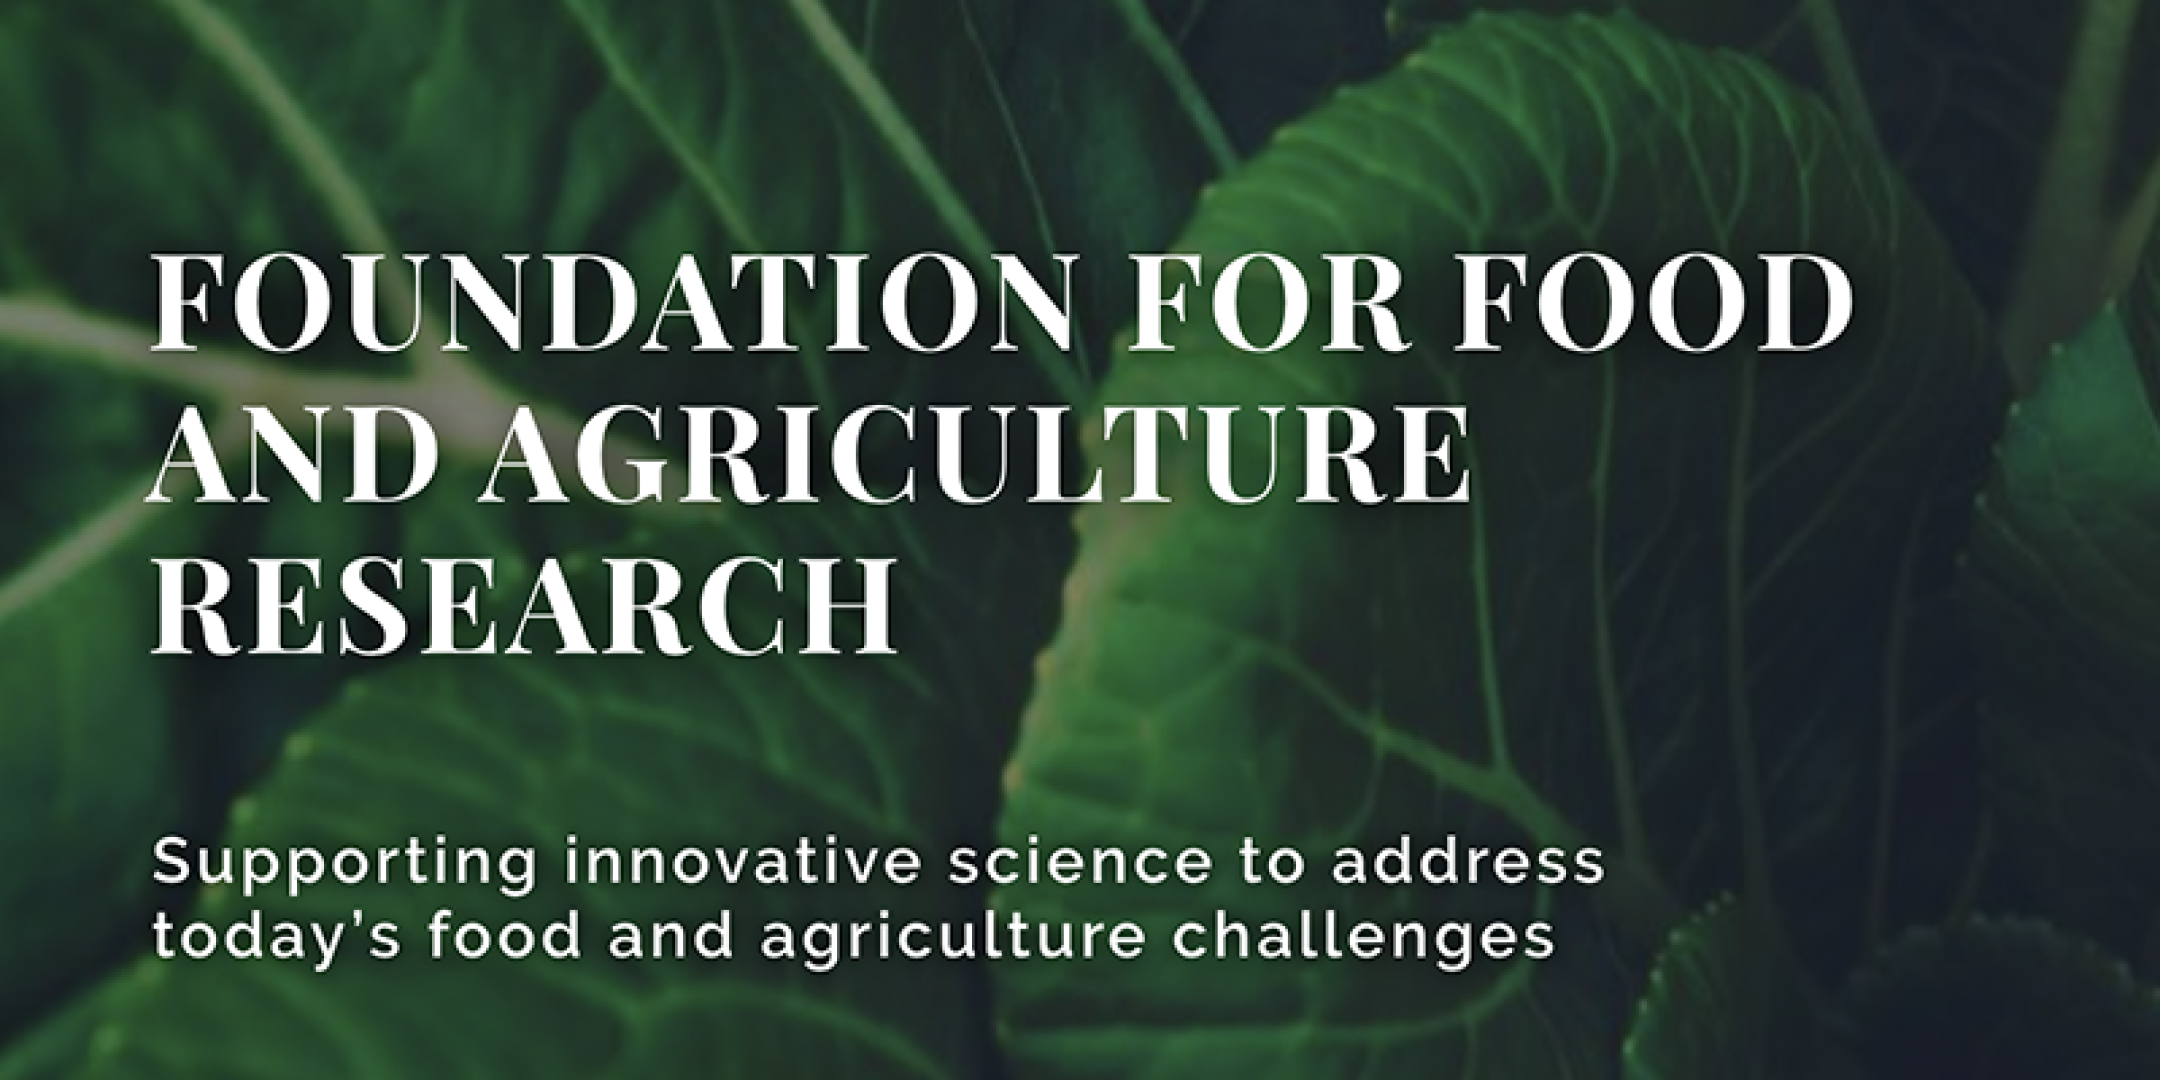 Foundation-for-food-and-agriculture-research-1